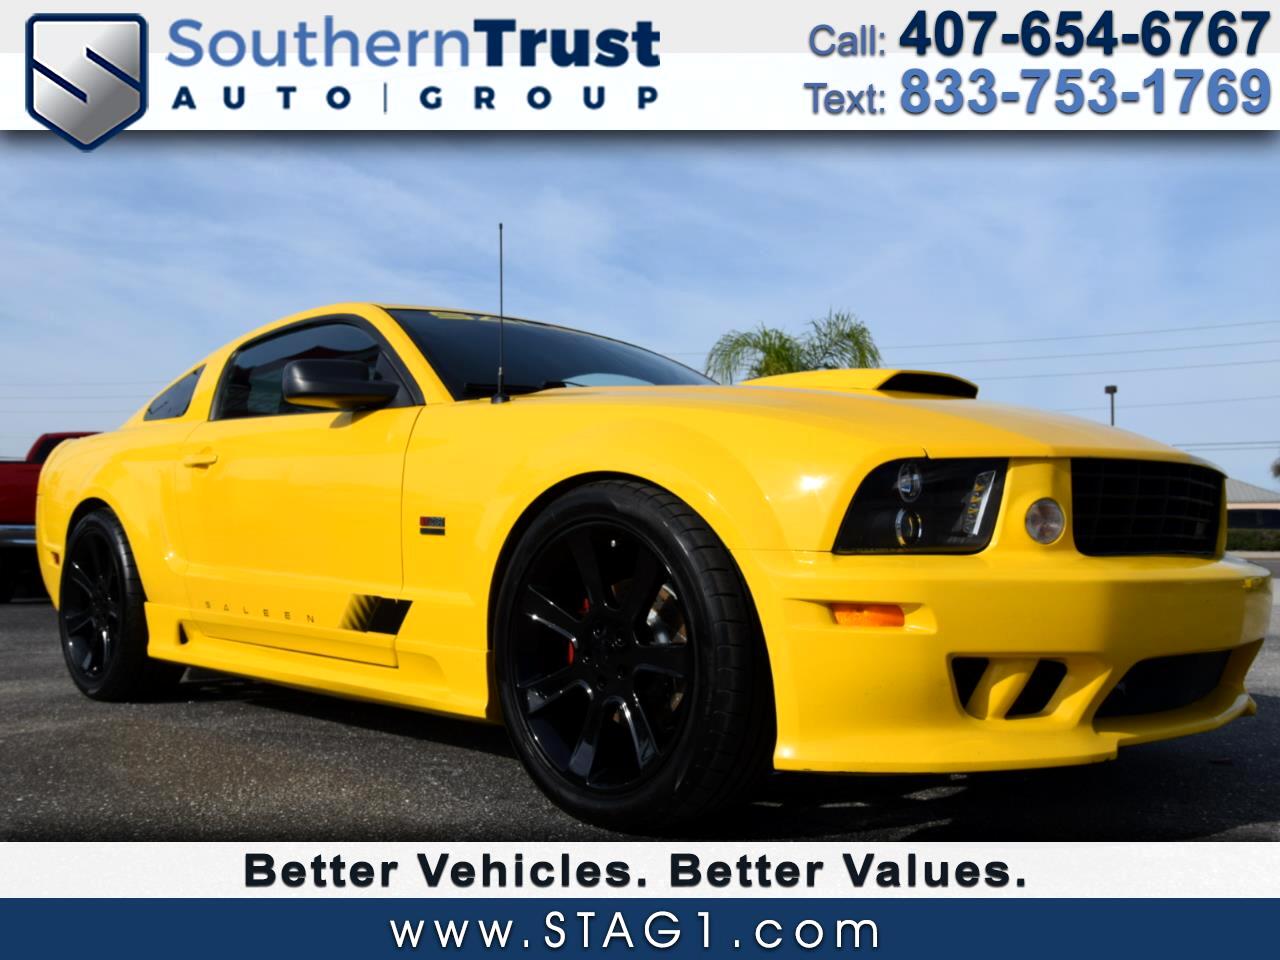 Ford Mustang S281 Saleen 2005